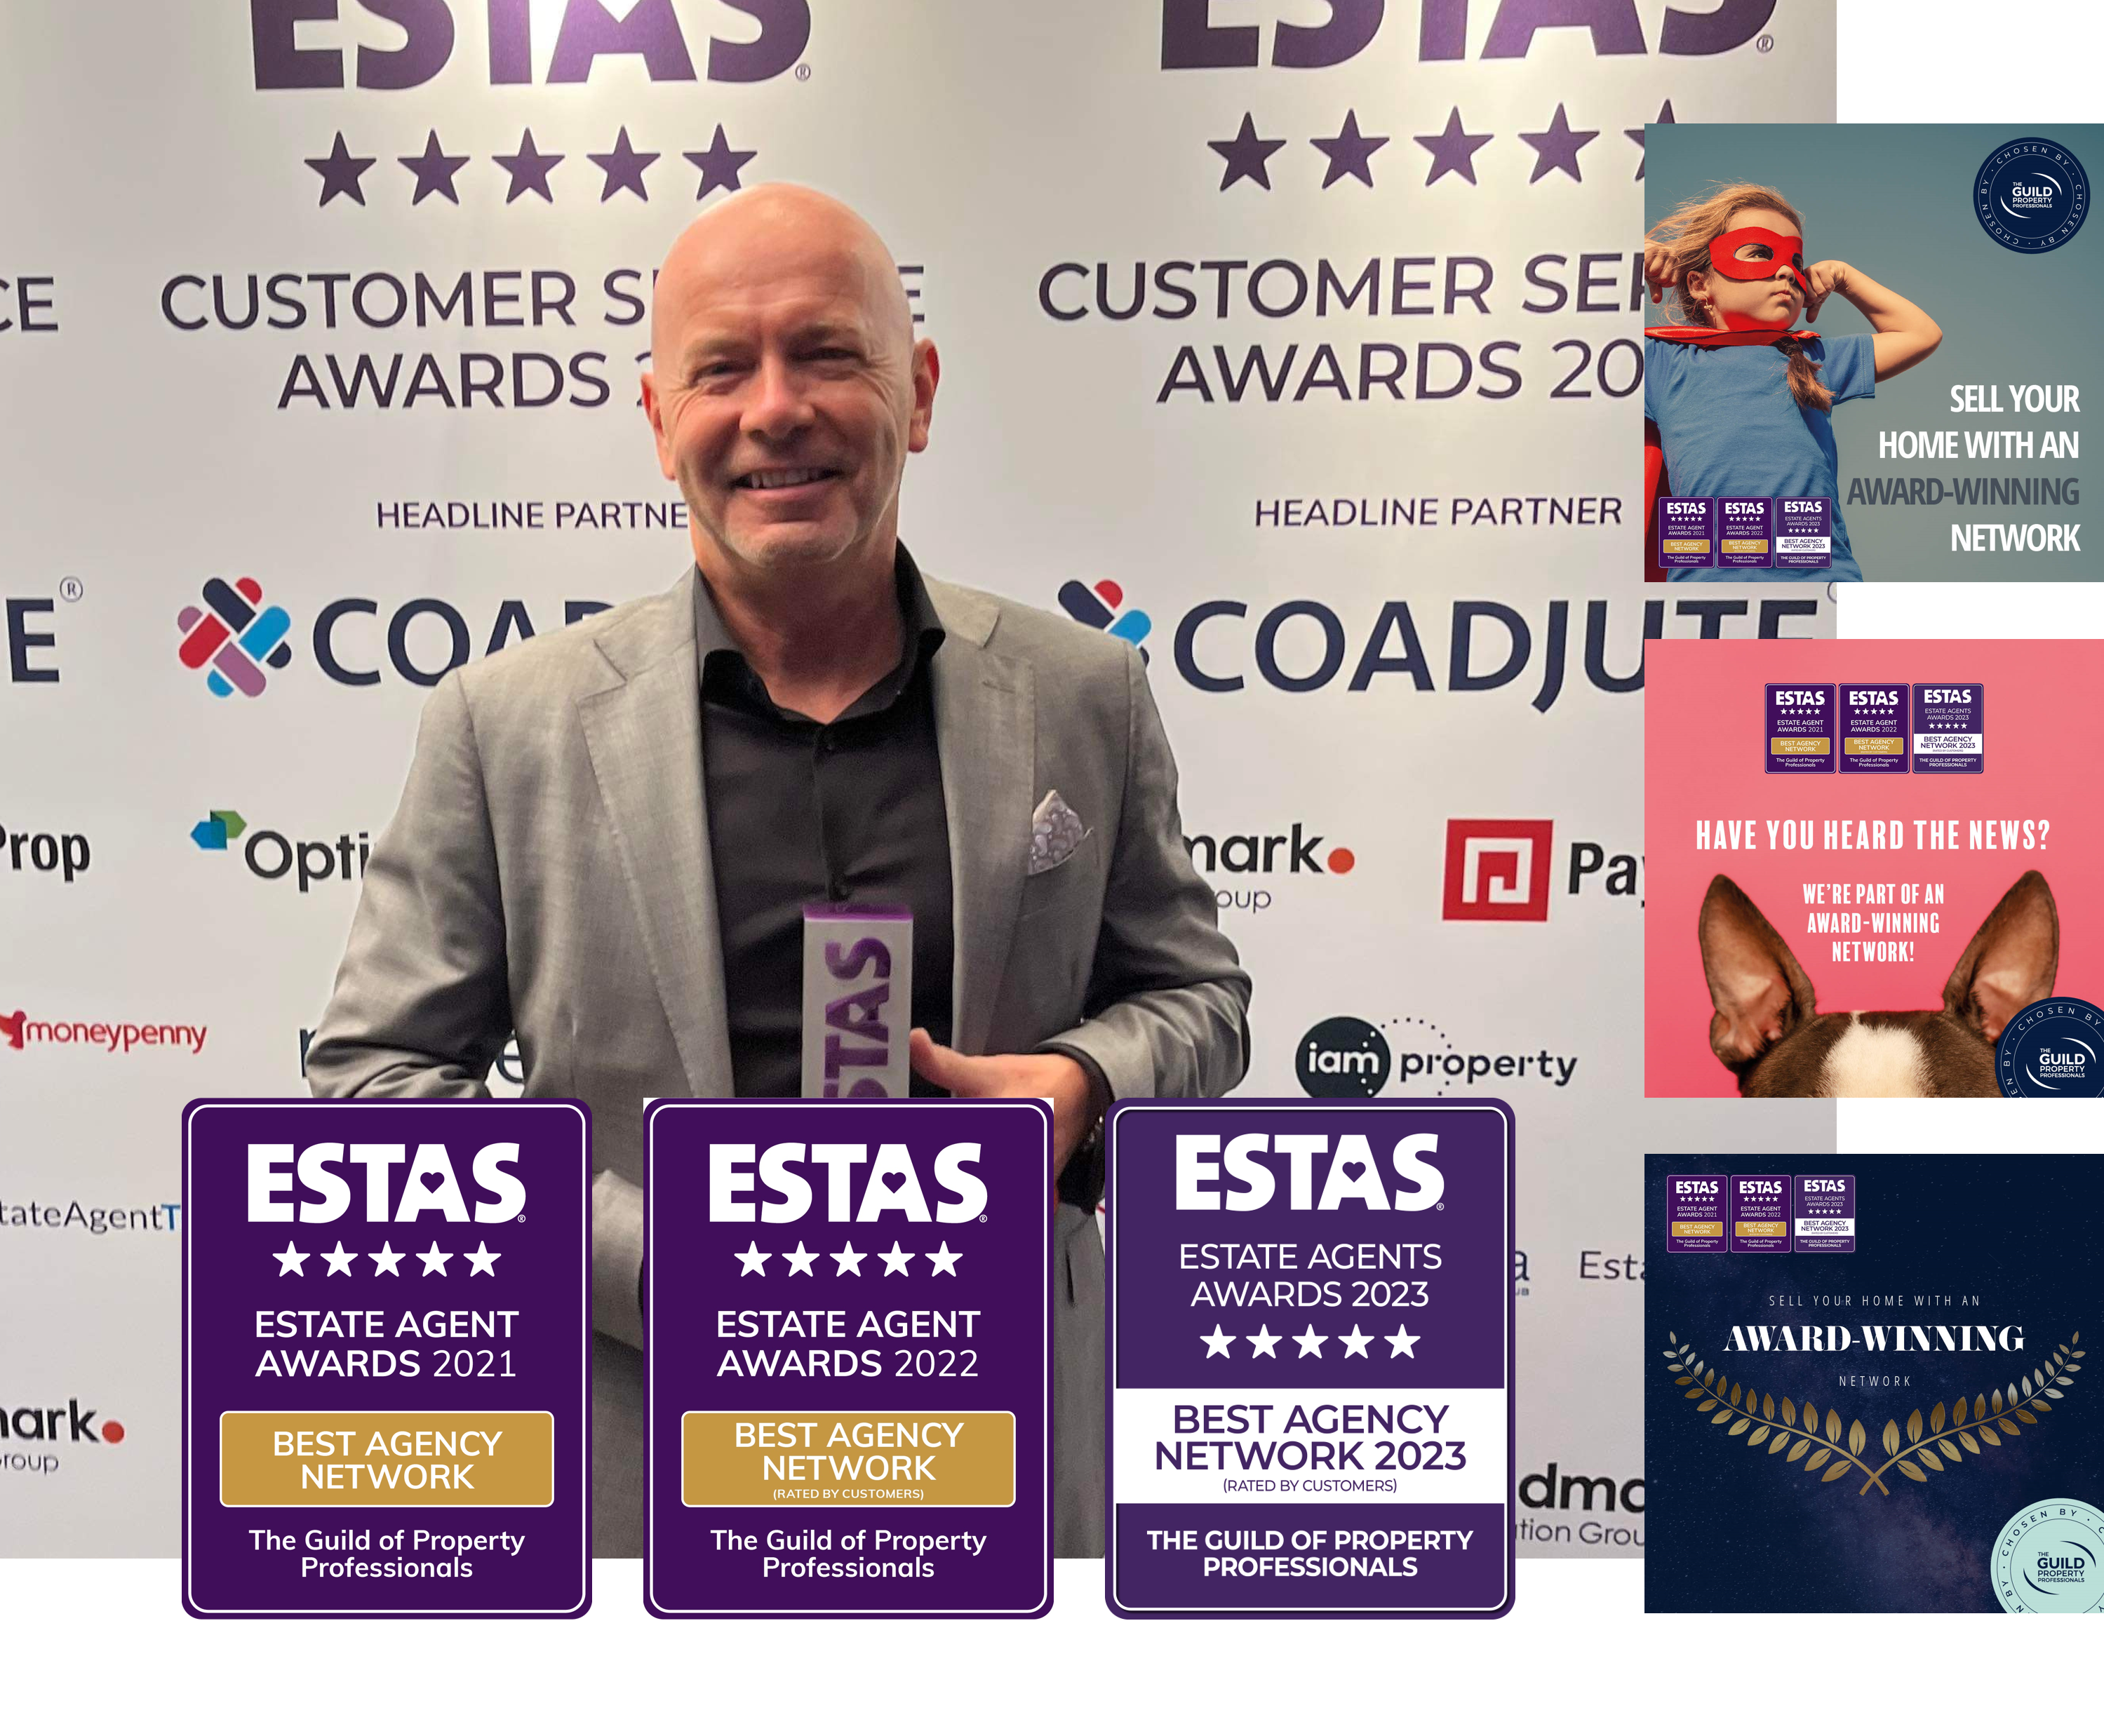 How many times has The Guild won Best Agency Network at the ESTAS? 